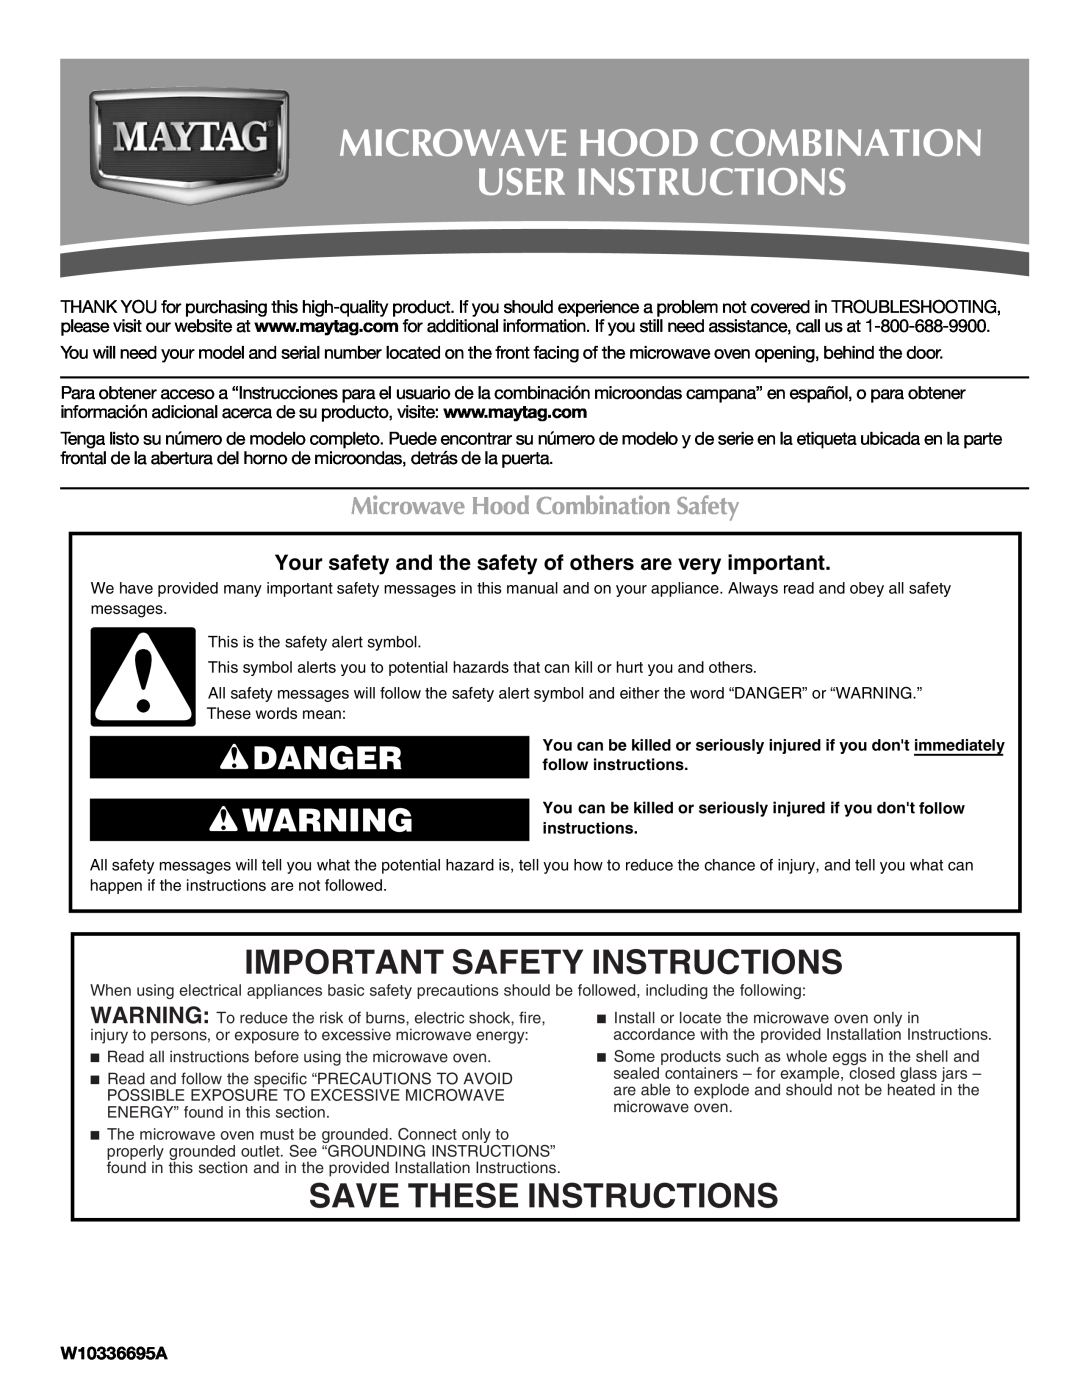 Maytag W10336695A important safety instructions Important Safety Instructions, Save These Instructions, Danger 